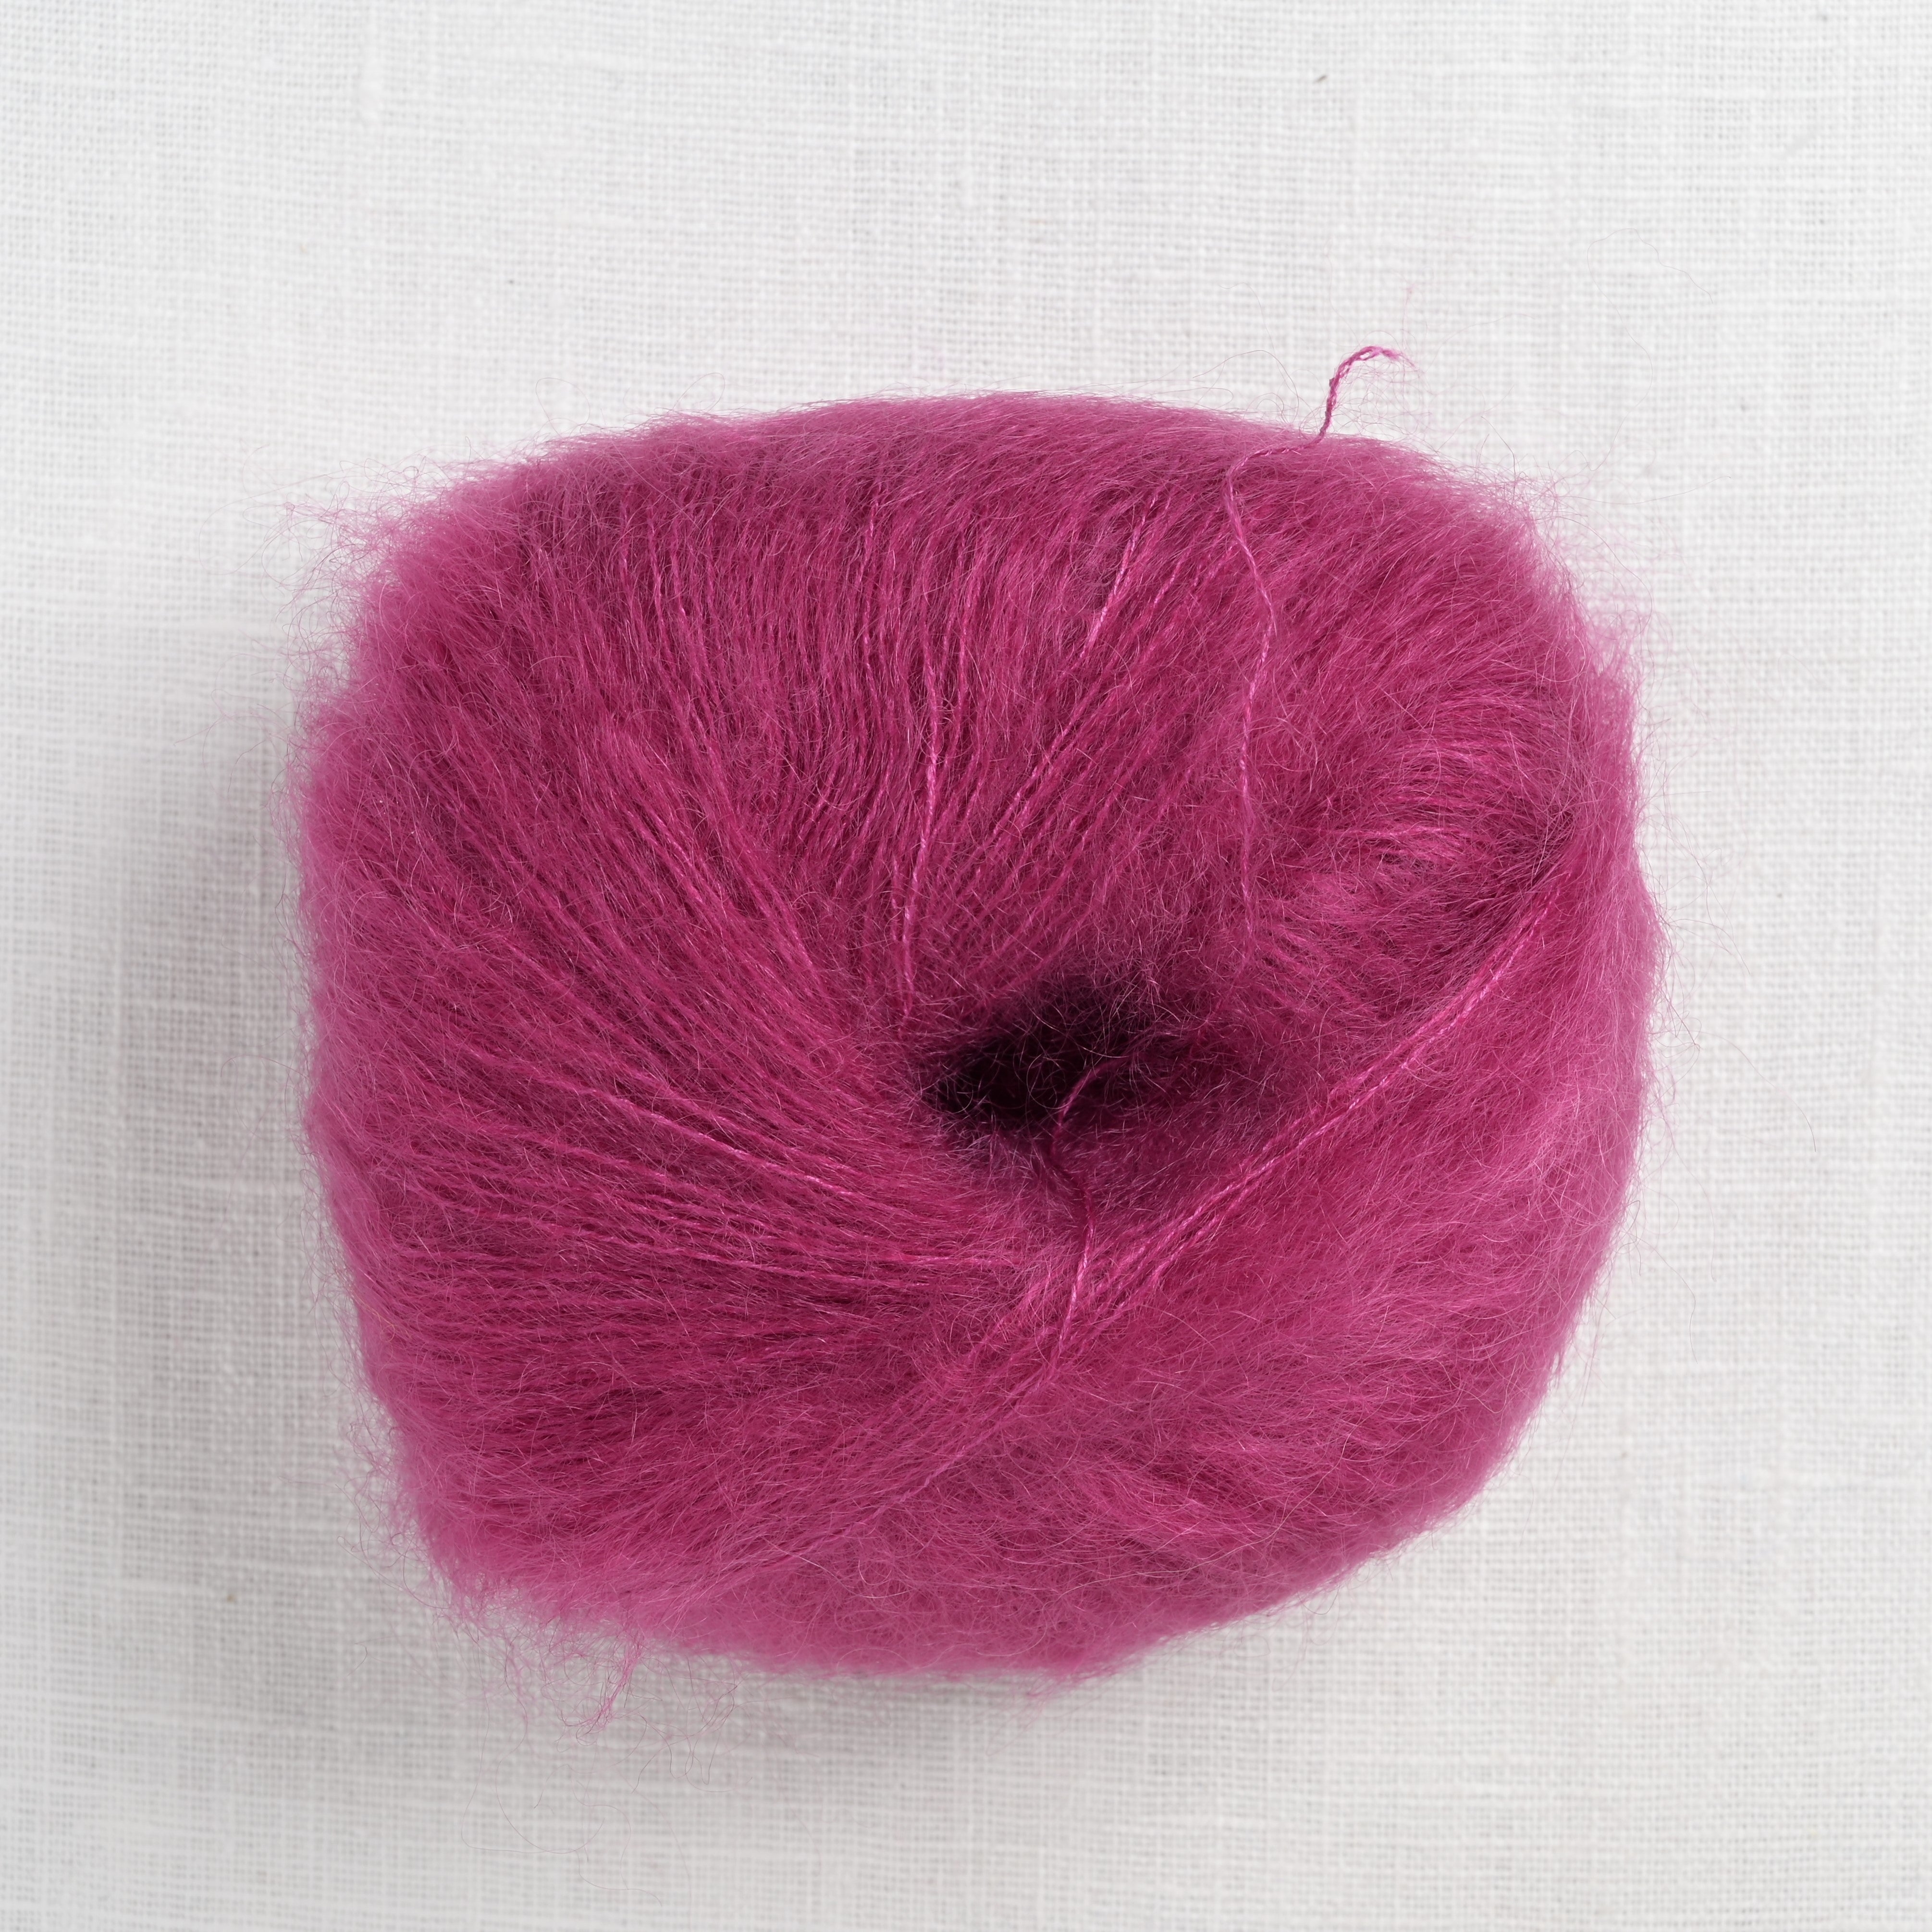 Lang Yarns Mohair Luxe 66 Hot Pink